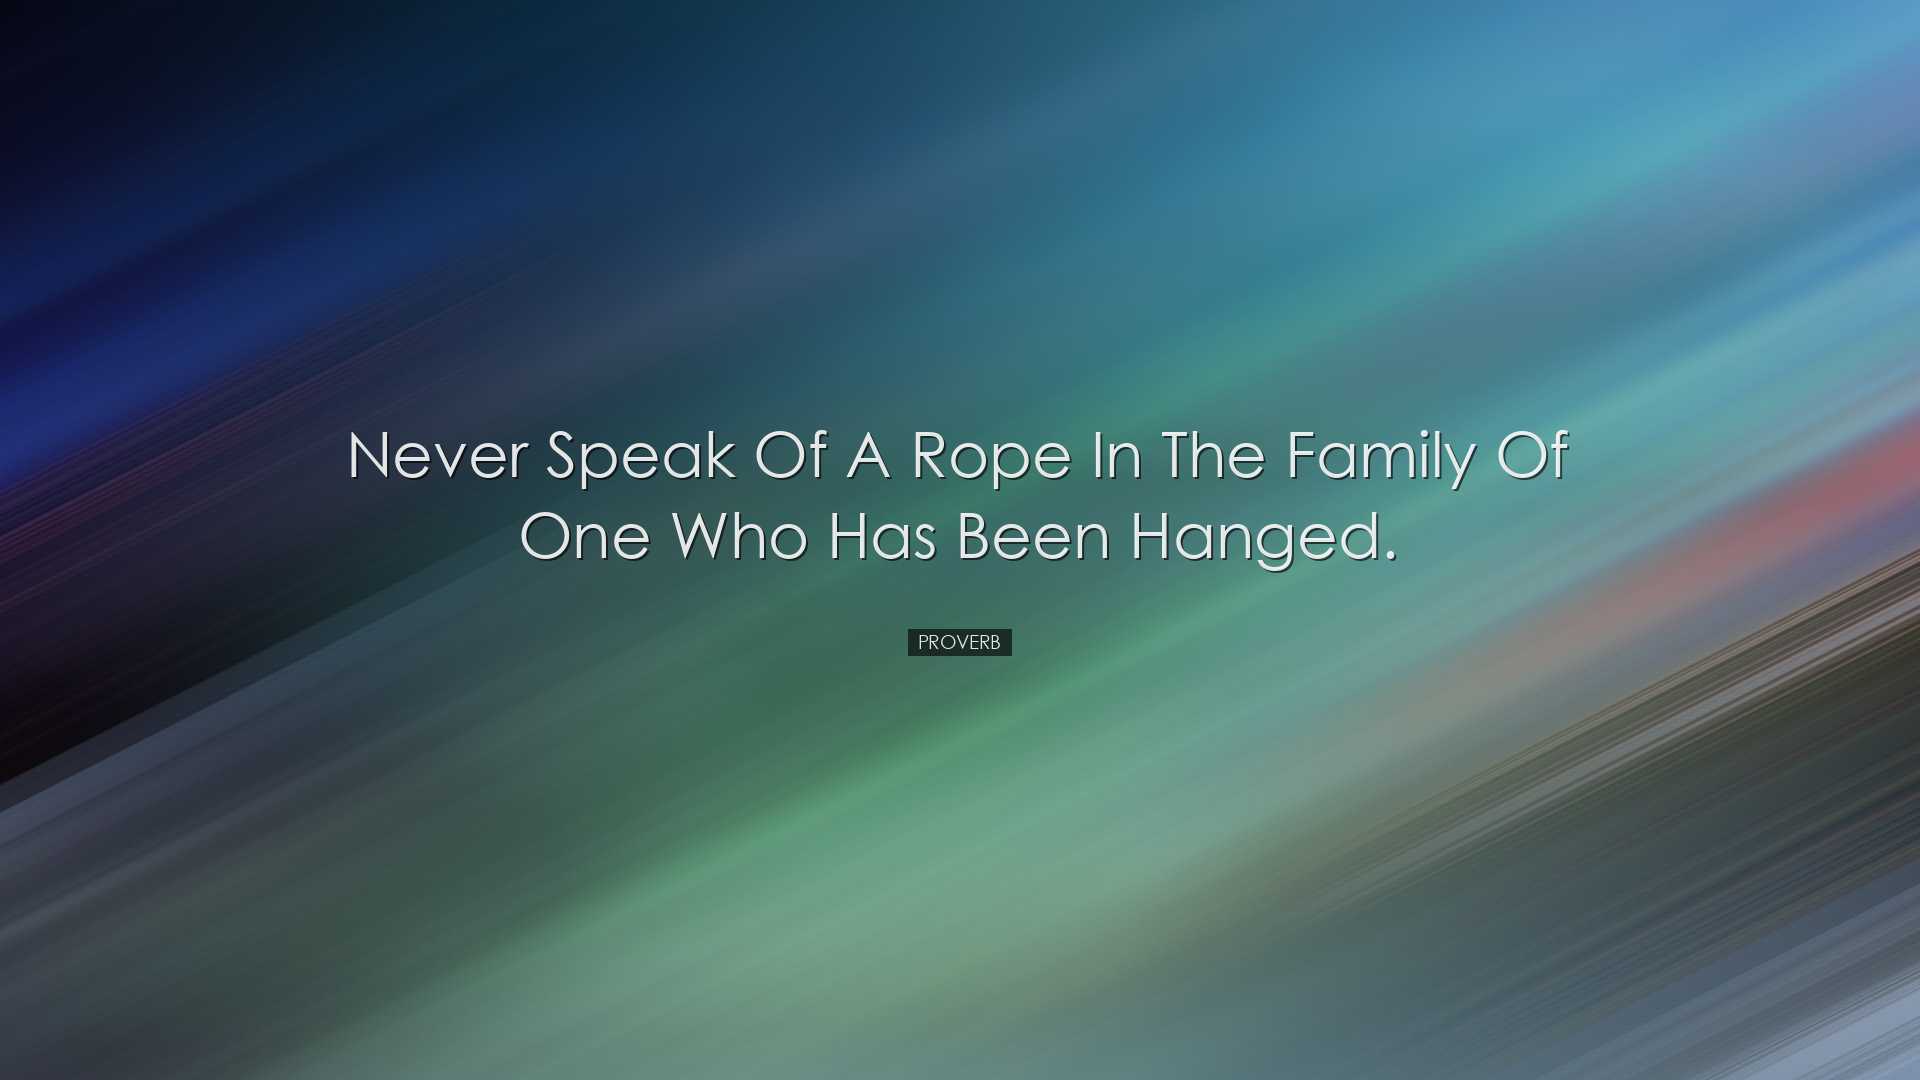 Never speak of a rope in the family of one who has been hanged. -